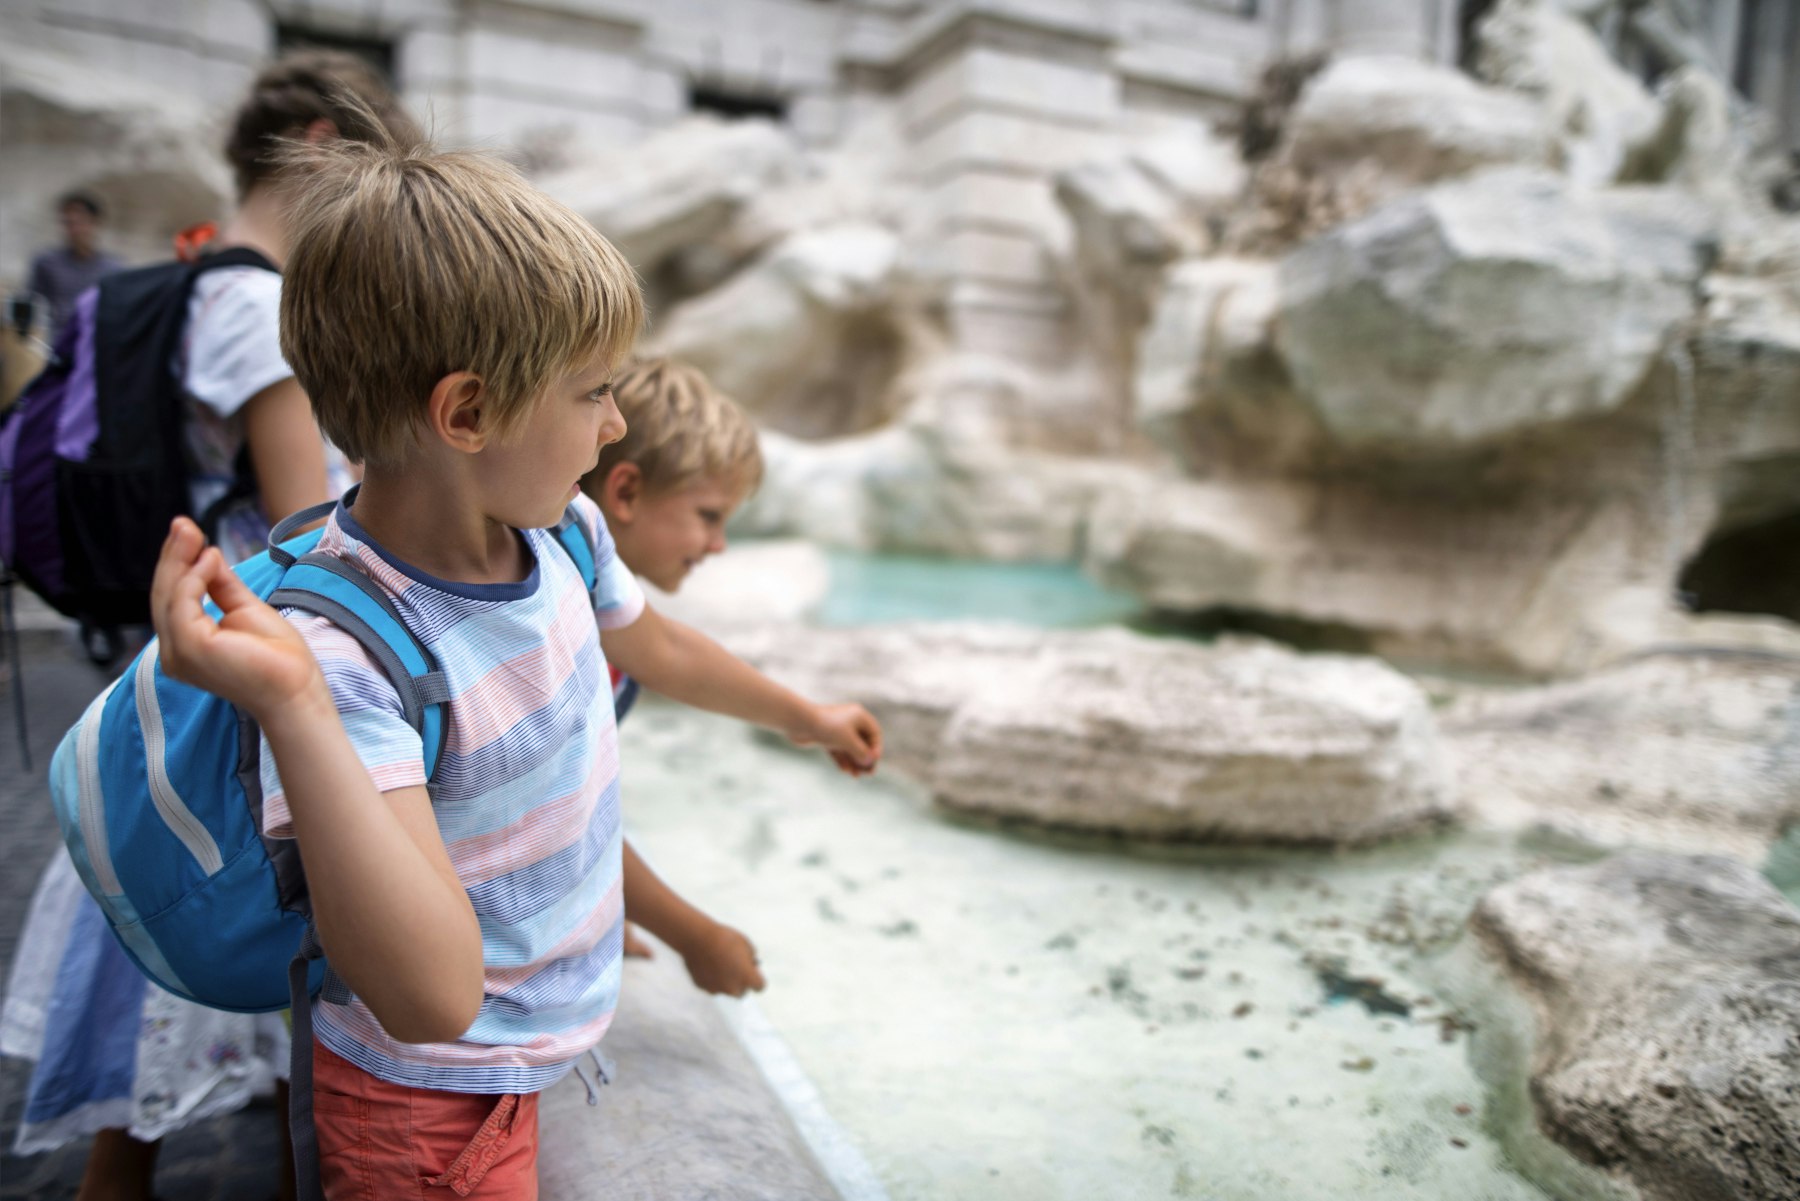 A picture of a child throwing a coin into the Trevi fountain